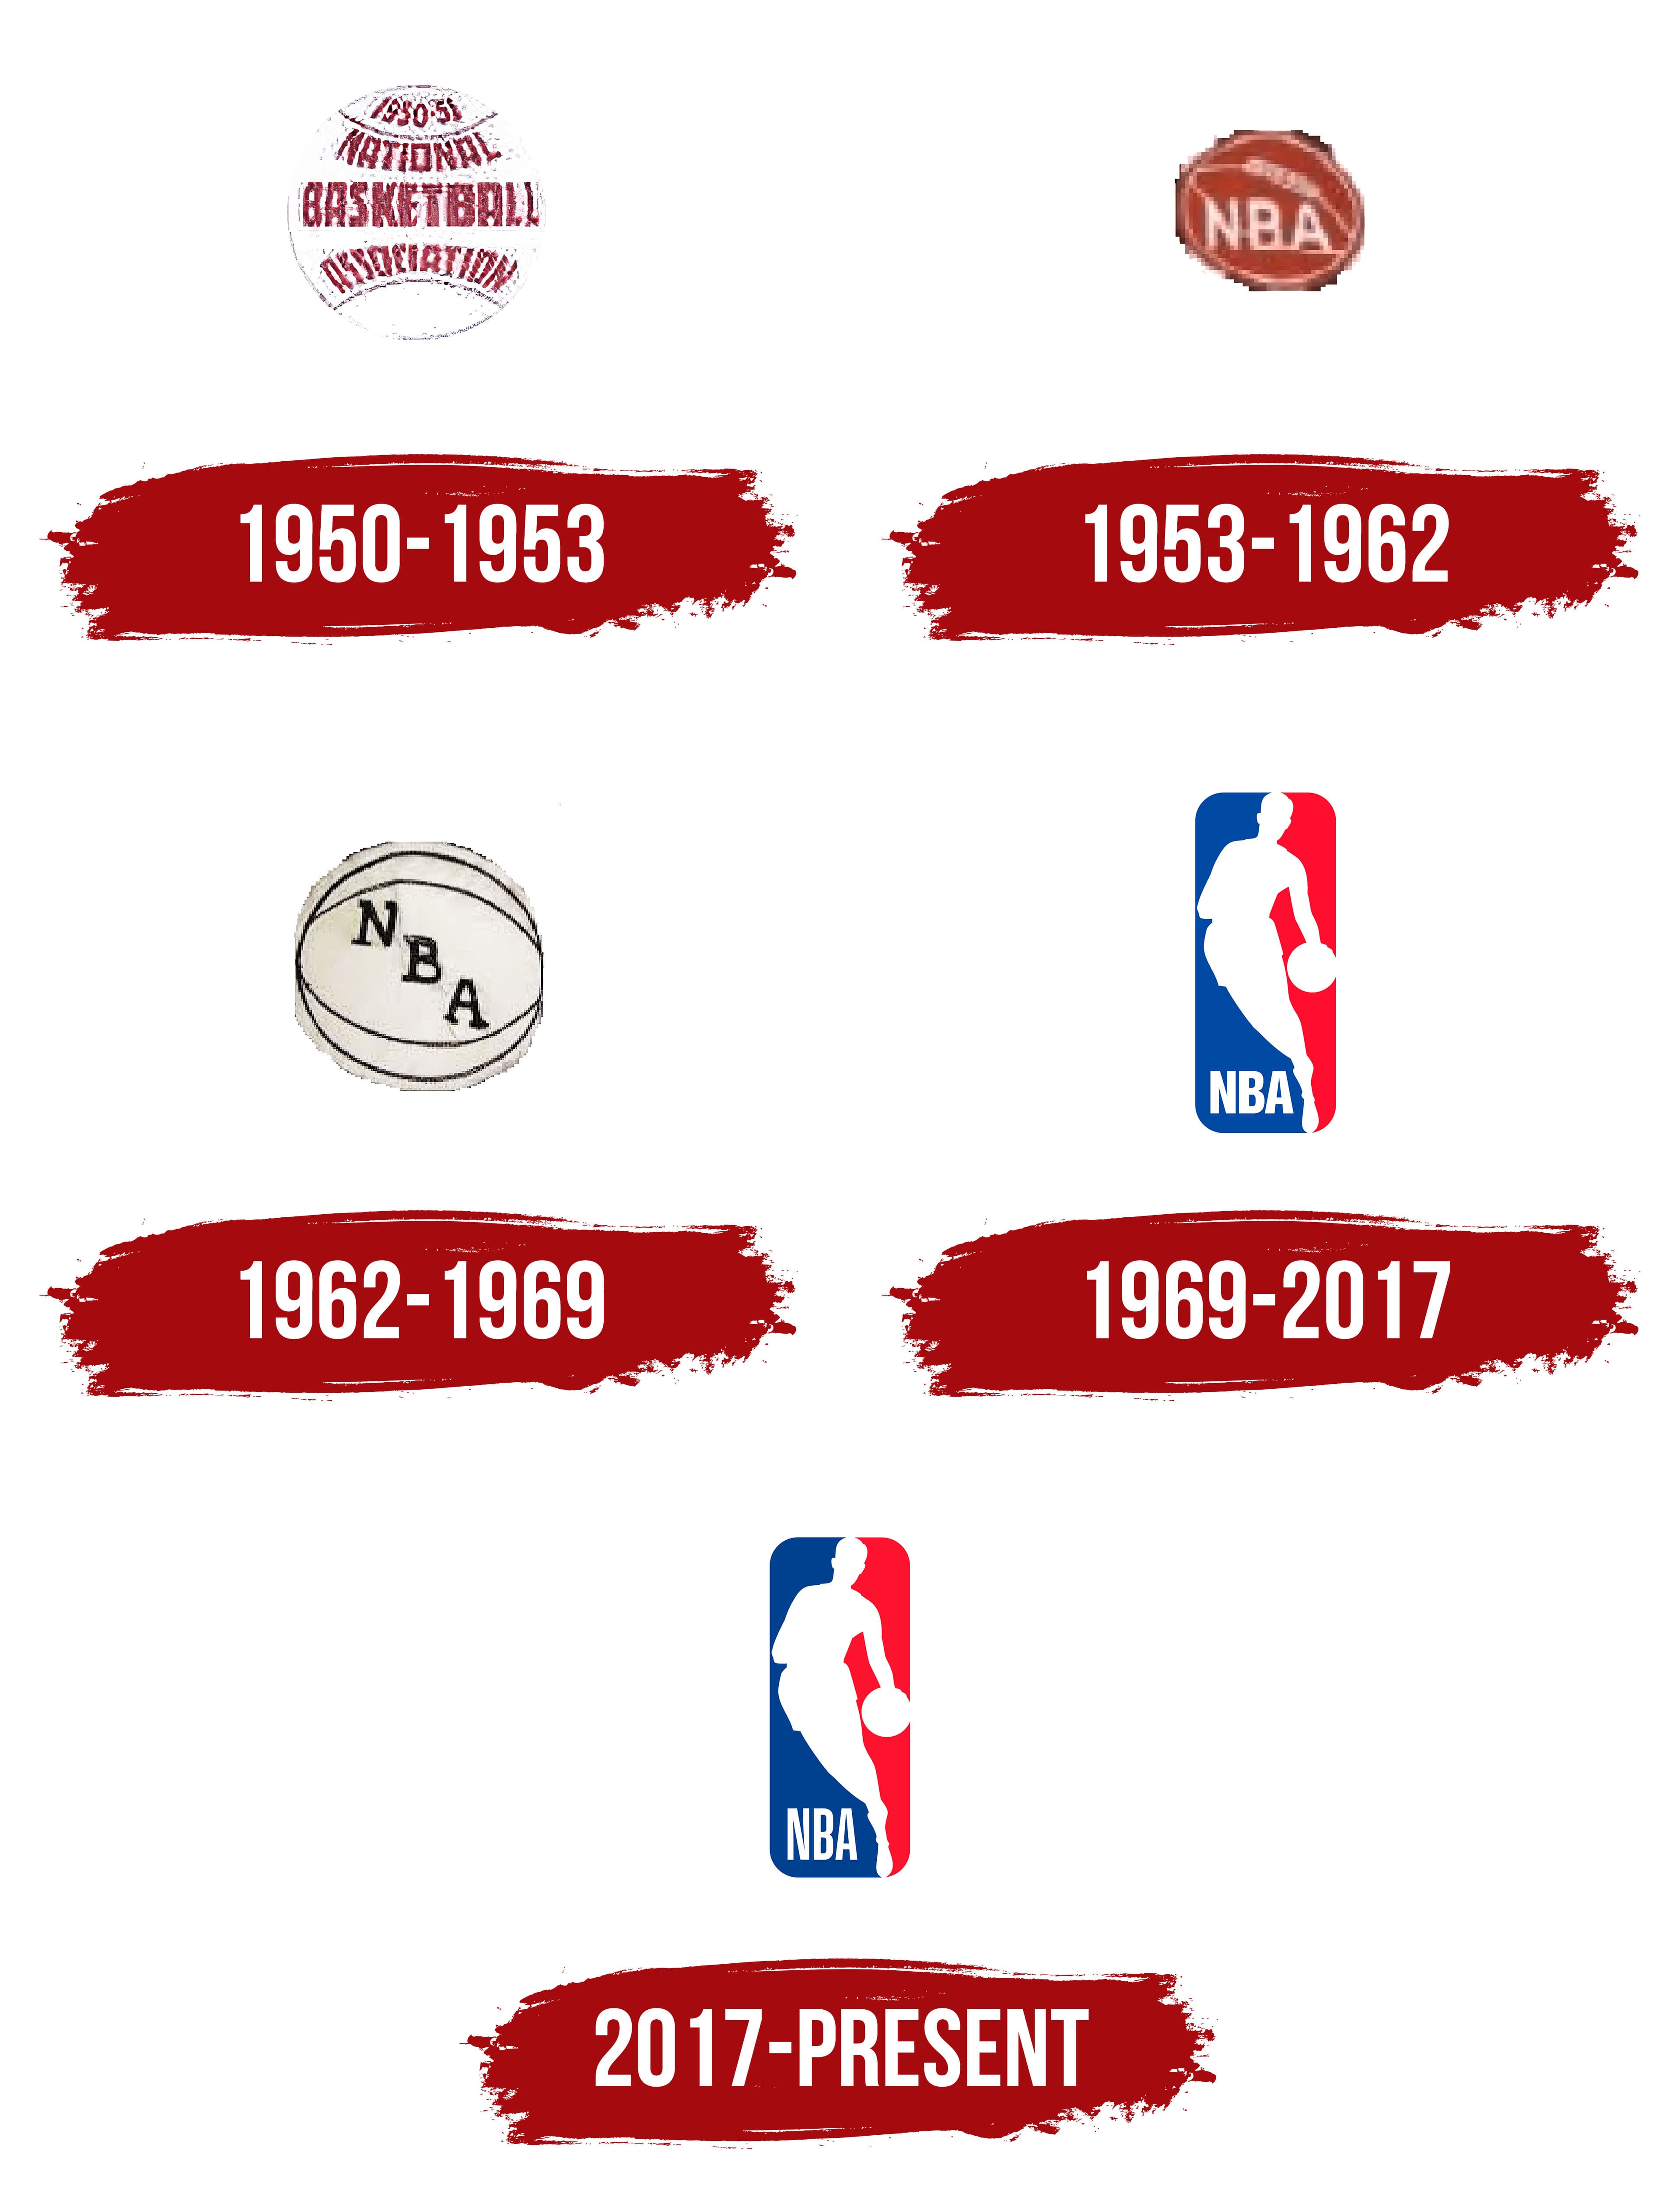 The story of the NBA logo